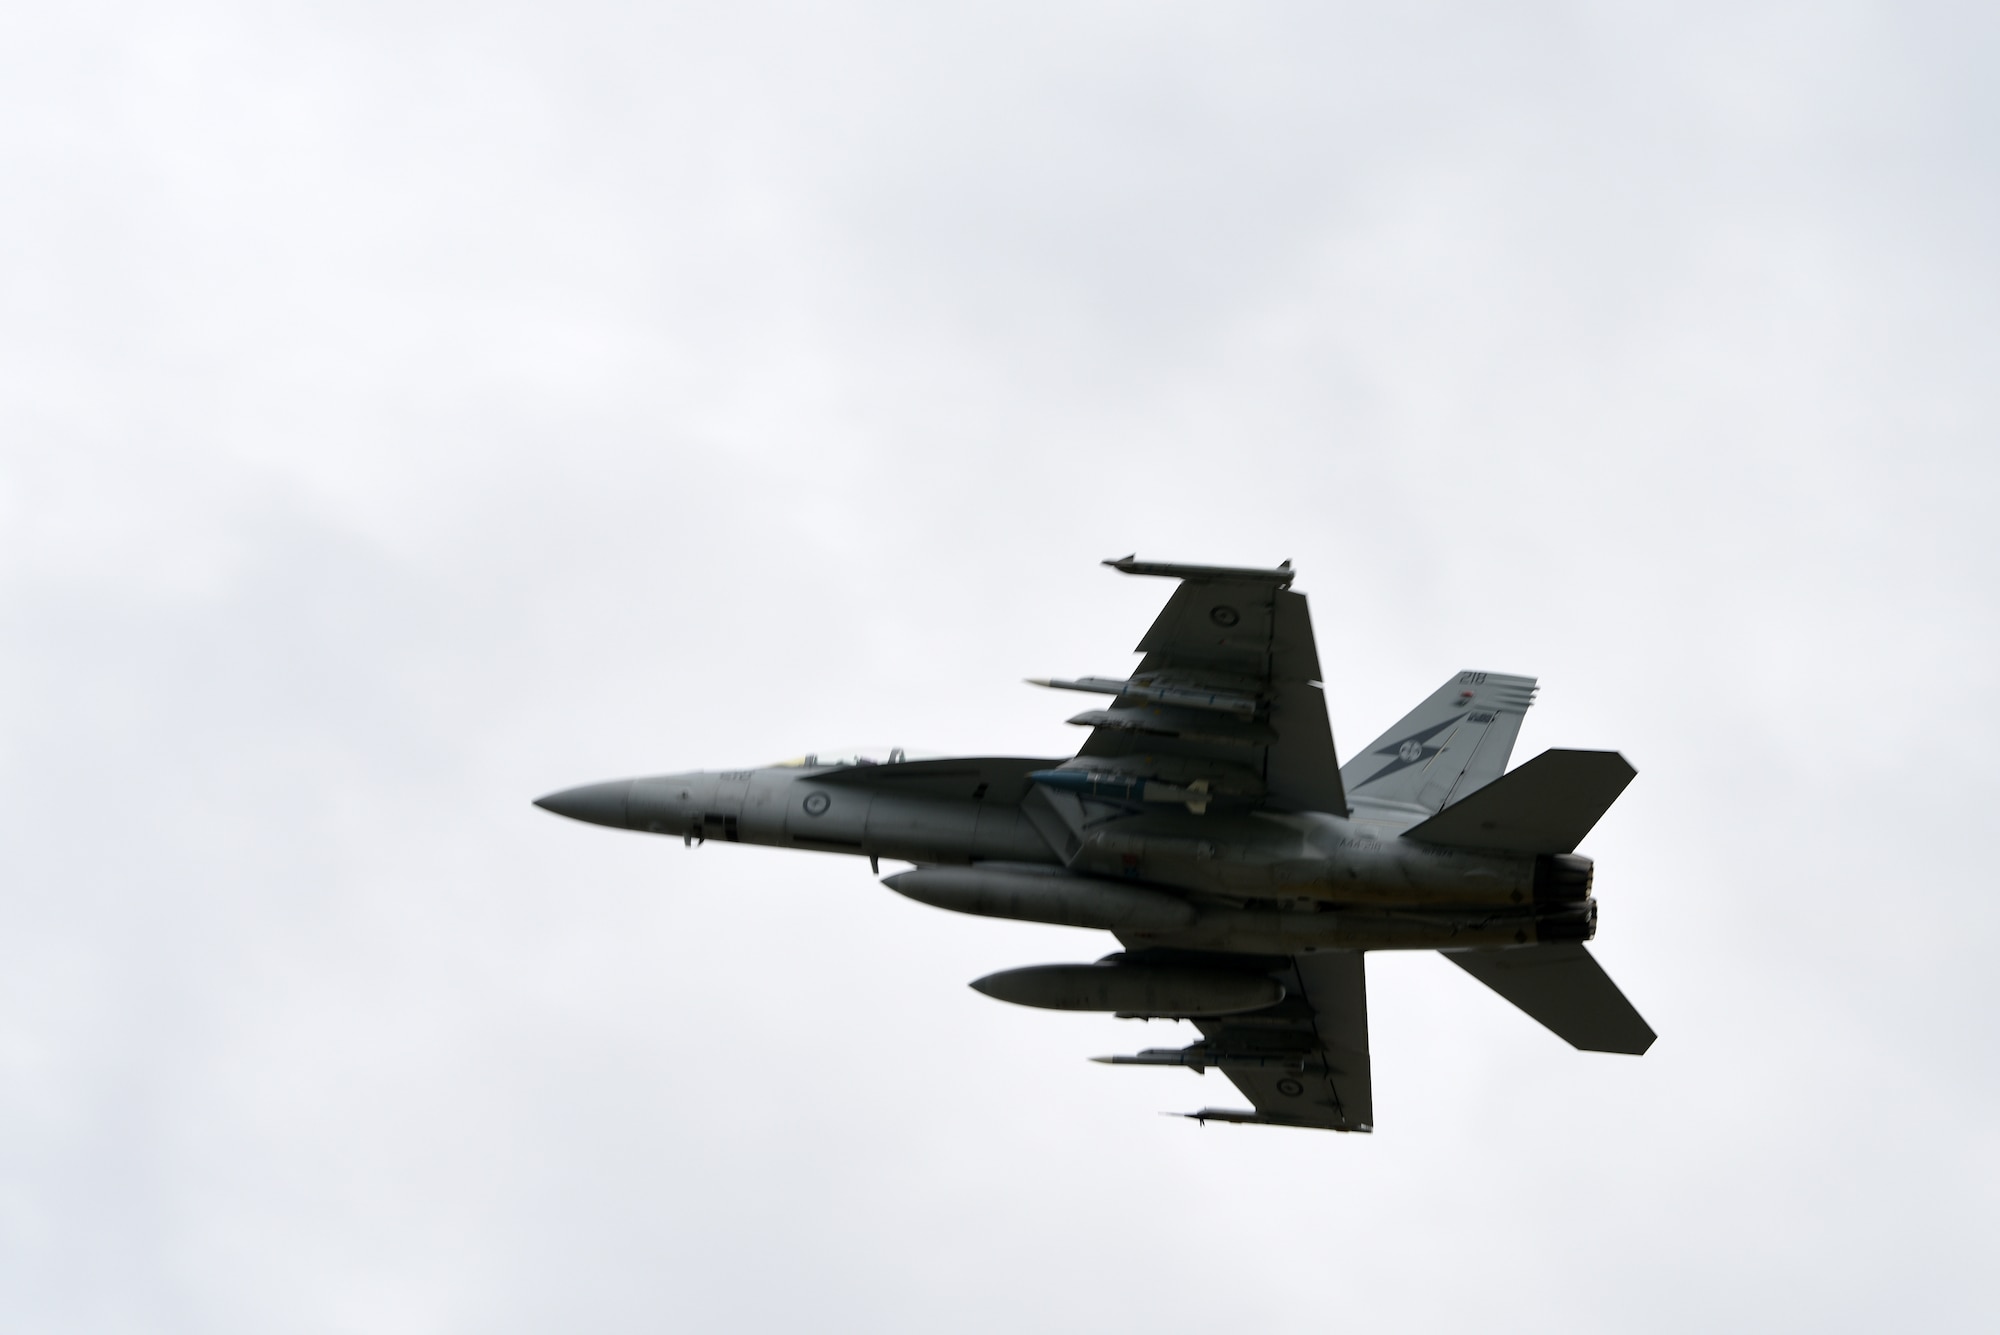 A Royal Australian Air Force (RAAF) F/A-18F Super Hornet takes off during Exercise Diamond Storm at RAAF Base Darwin, Northern Territory, May 9, 2019.